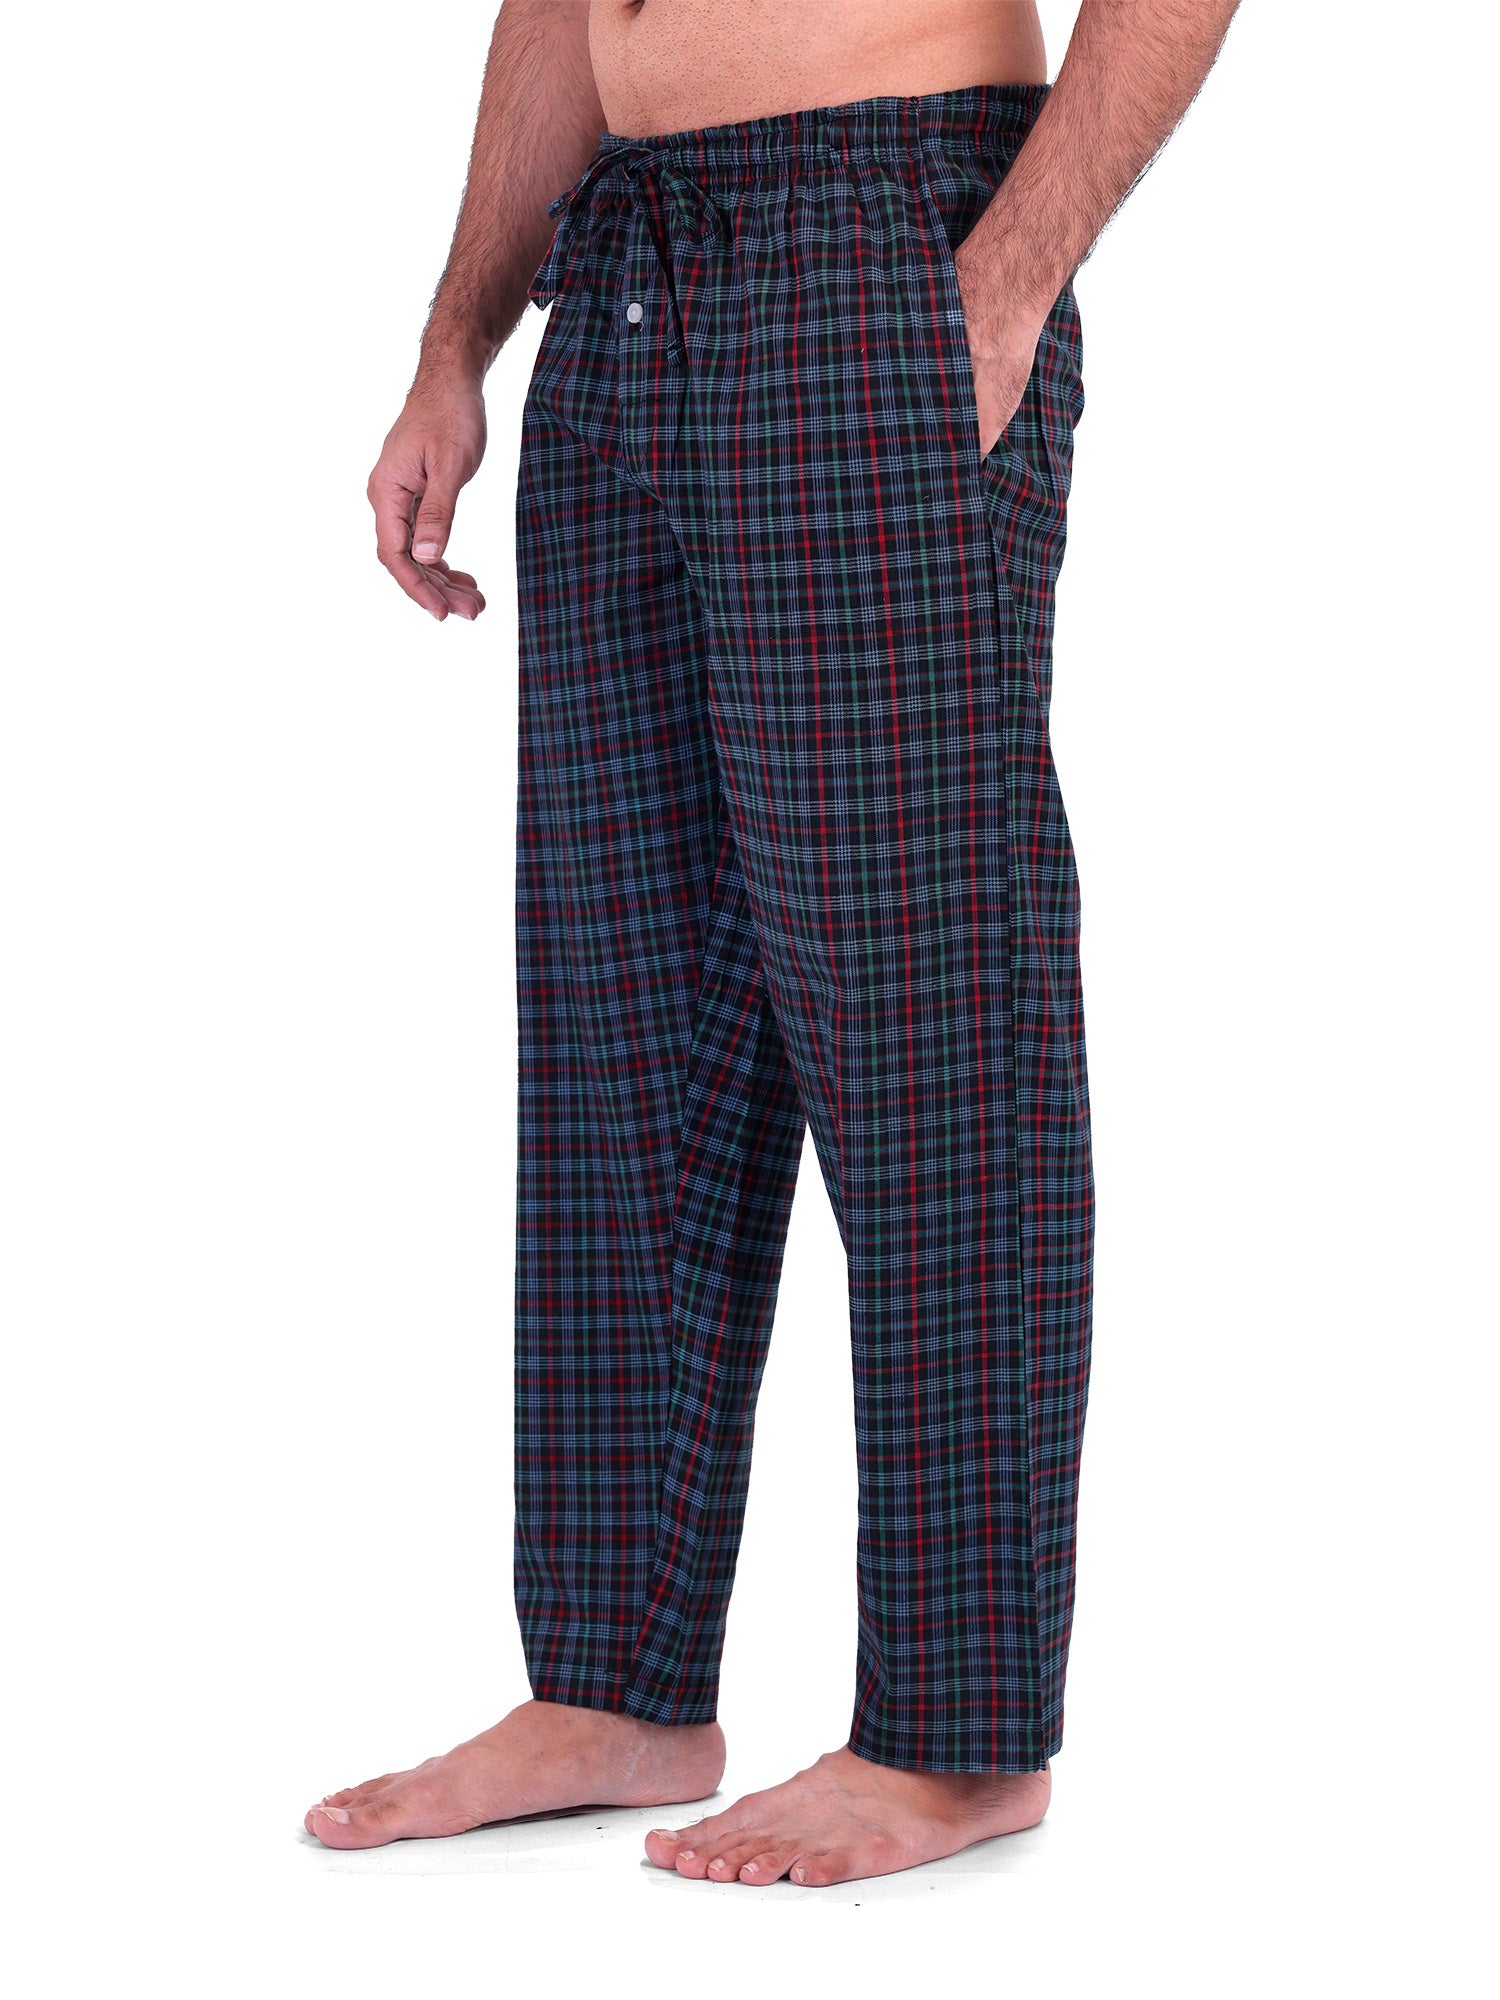 men flannel pajama pants, Green and Red Plaid, X-Large 